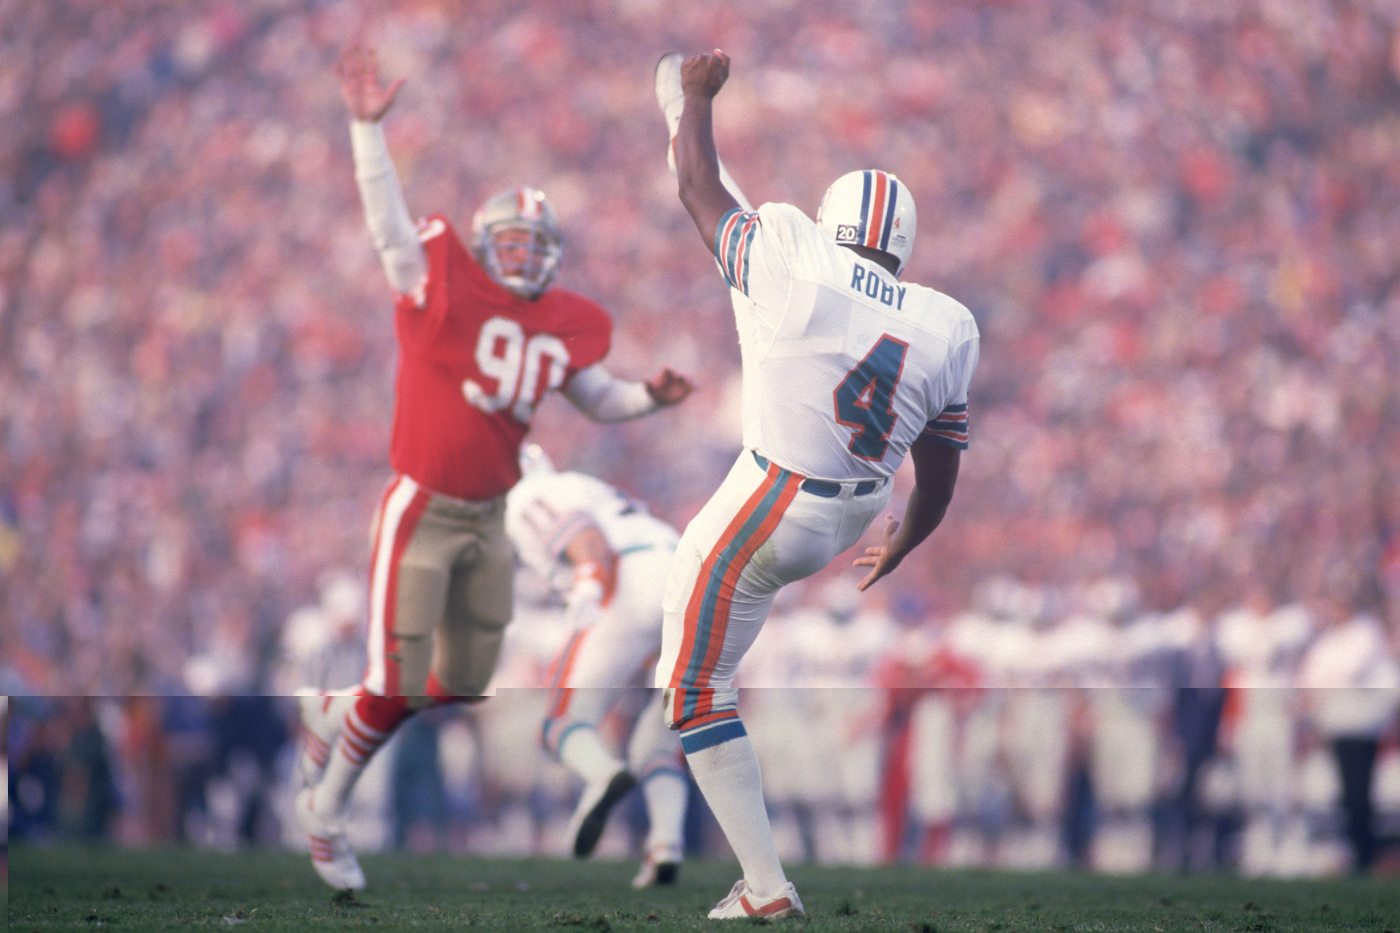 Reggie Roby was a very successful punter for the Miami Dolphins and broke down color barriers in the NFL. He, however, sadly died too young.